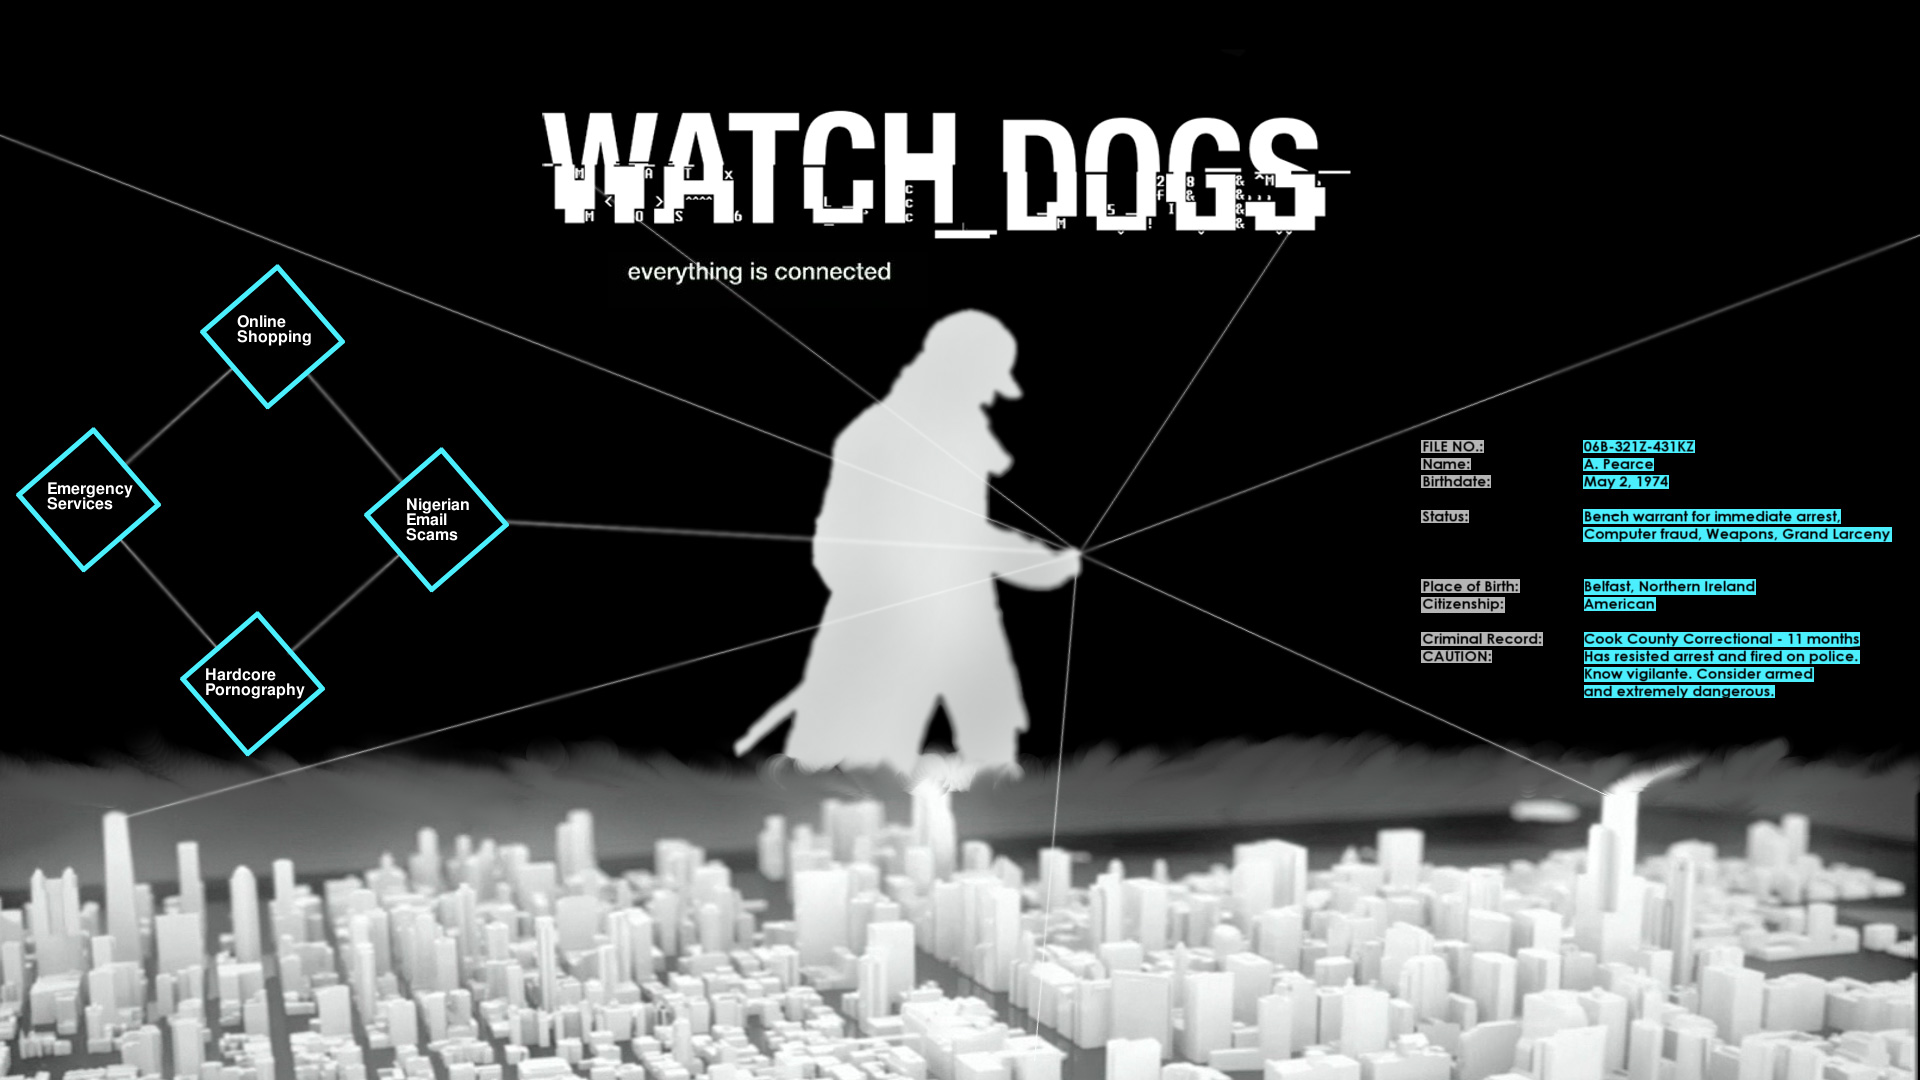  Watch Dogs HQ Background Wallpapers